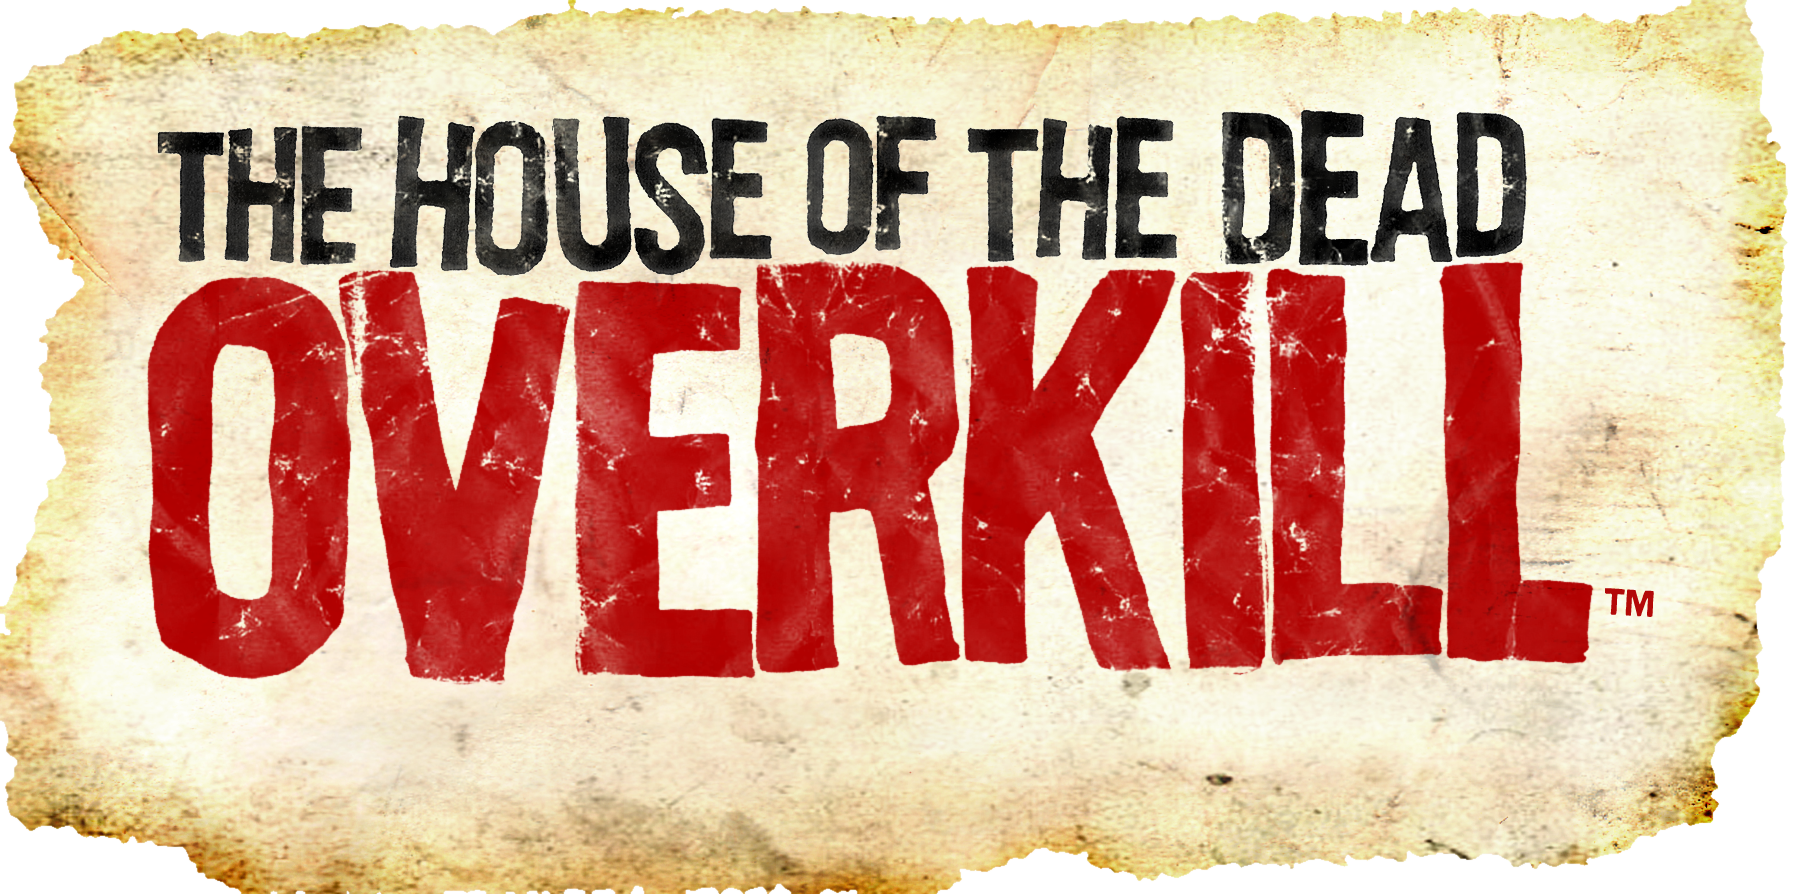 The house of the dead overkill